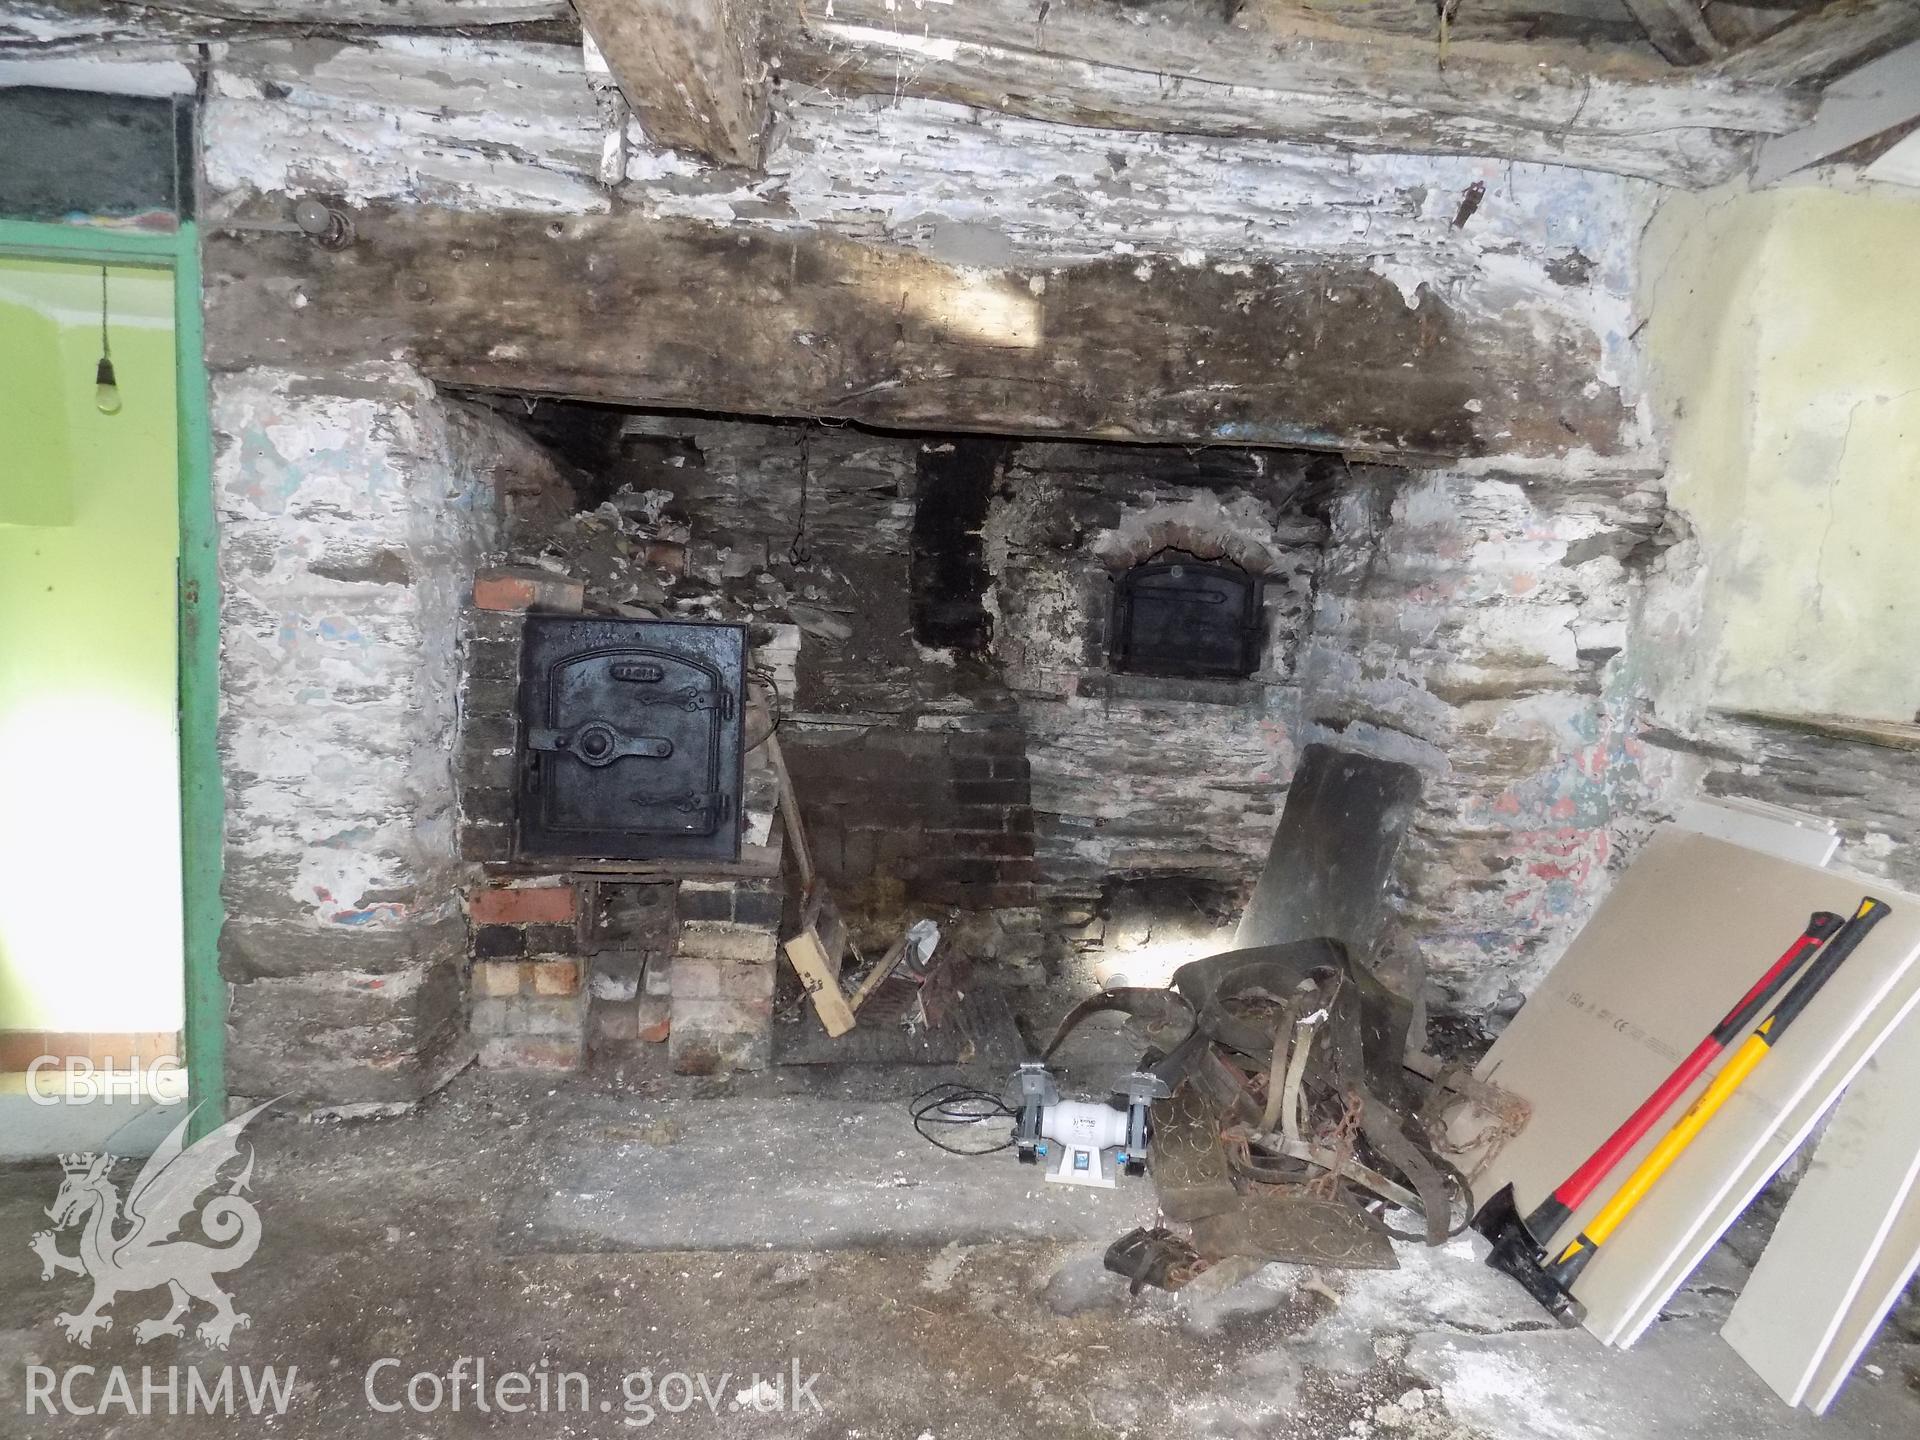 Digital colour photograph showing remains of fireplace in building attached to Tywyll Nodwydd house, Pennal, dated 2019. Photographed by Mr Gary Coulsby to meet a condition attached to a planning application.